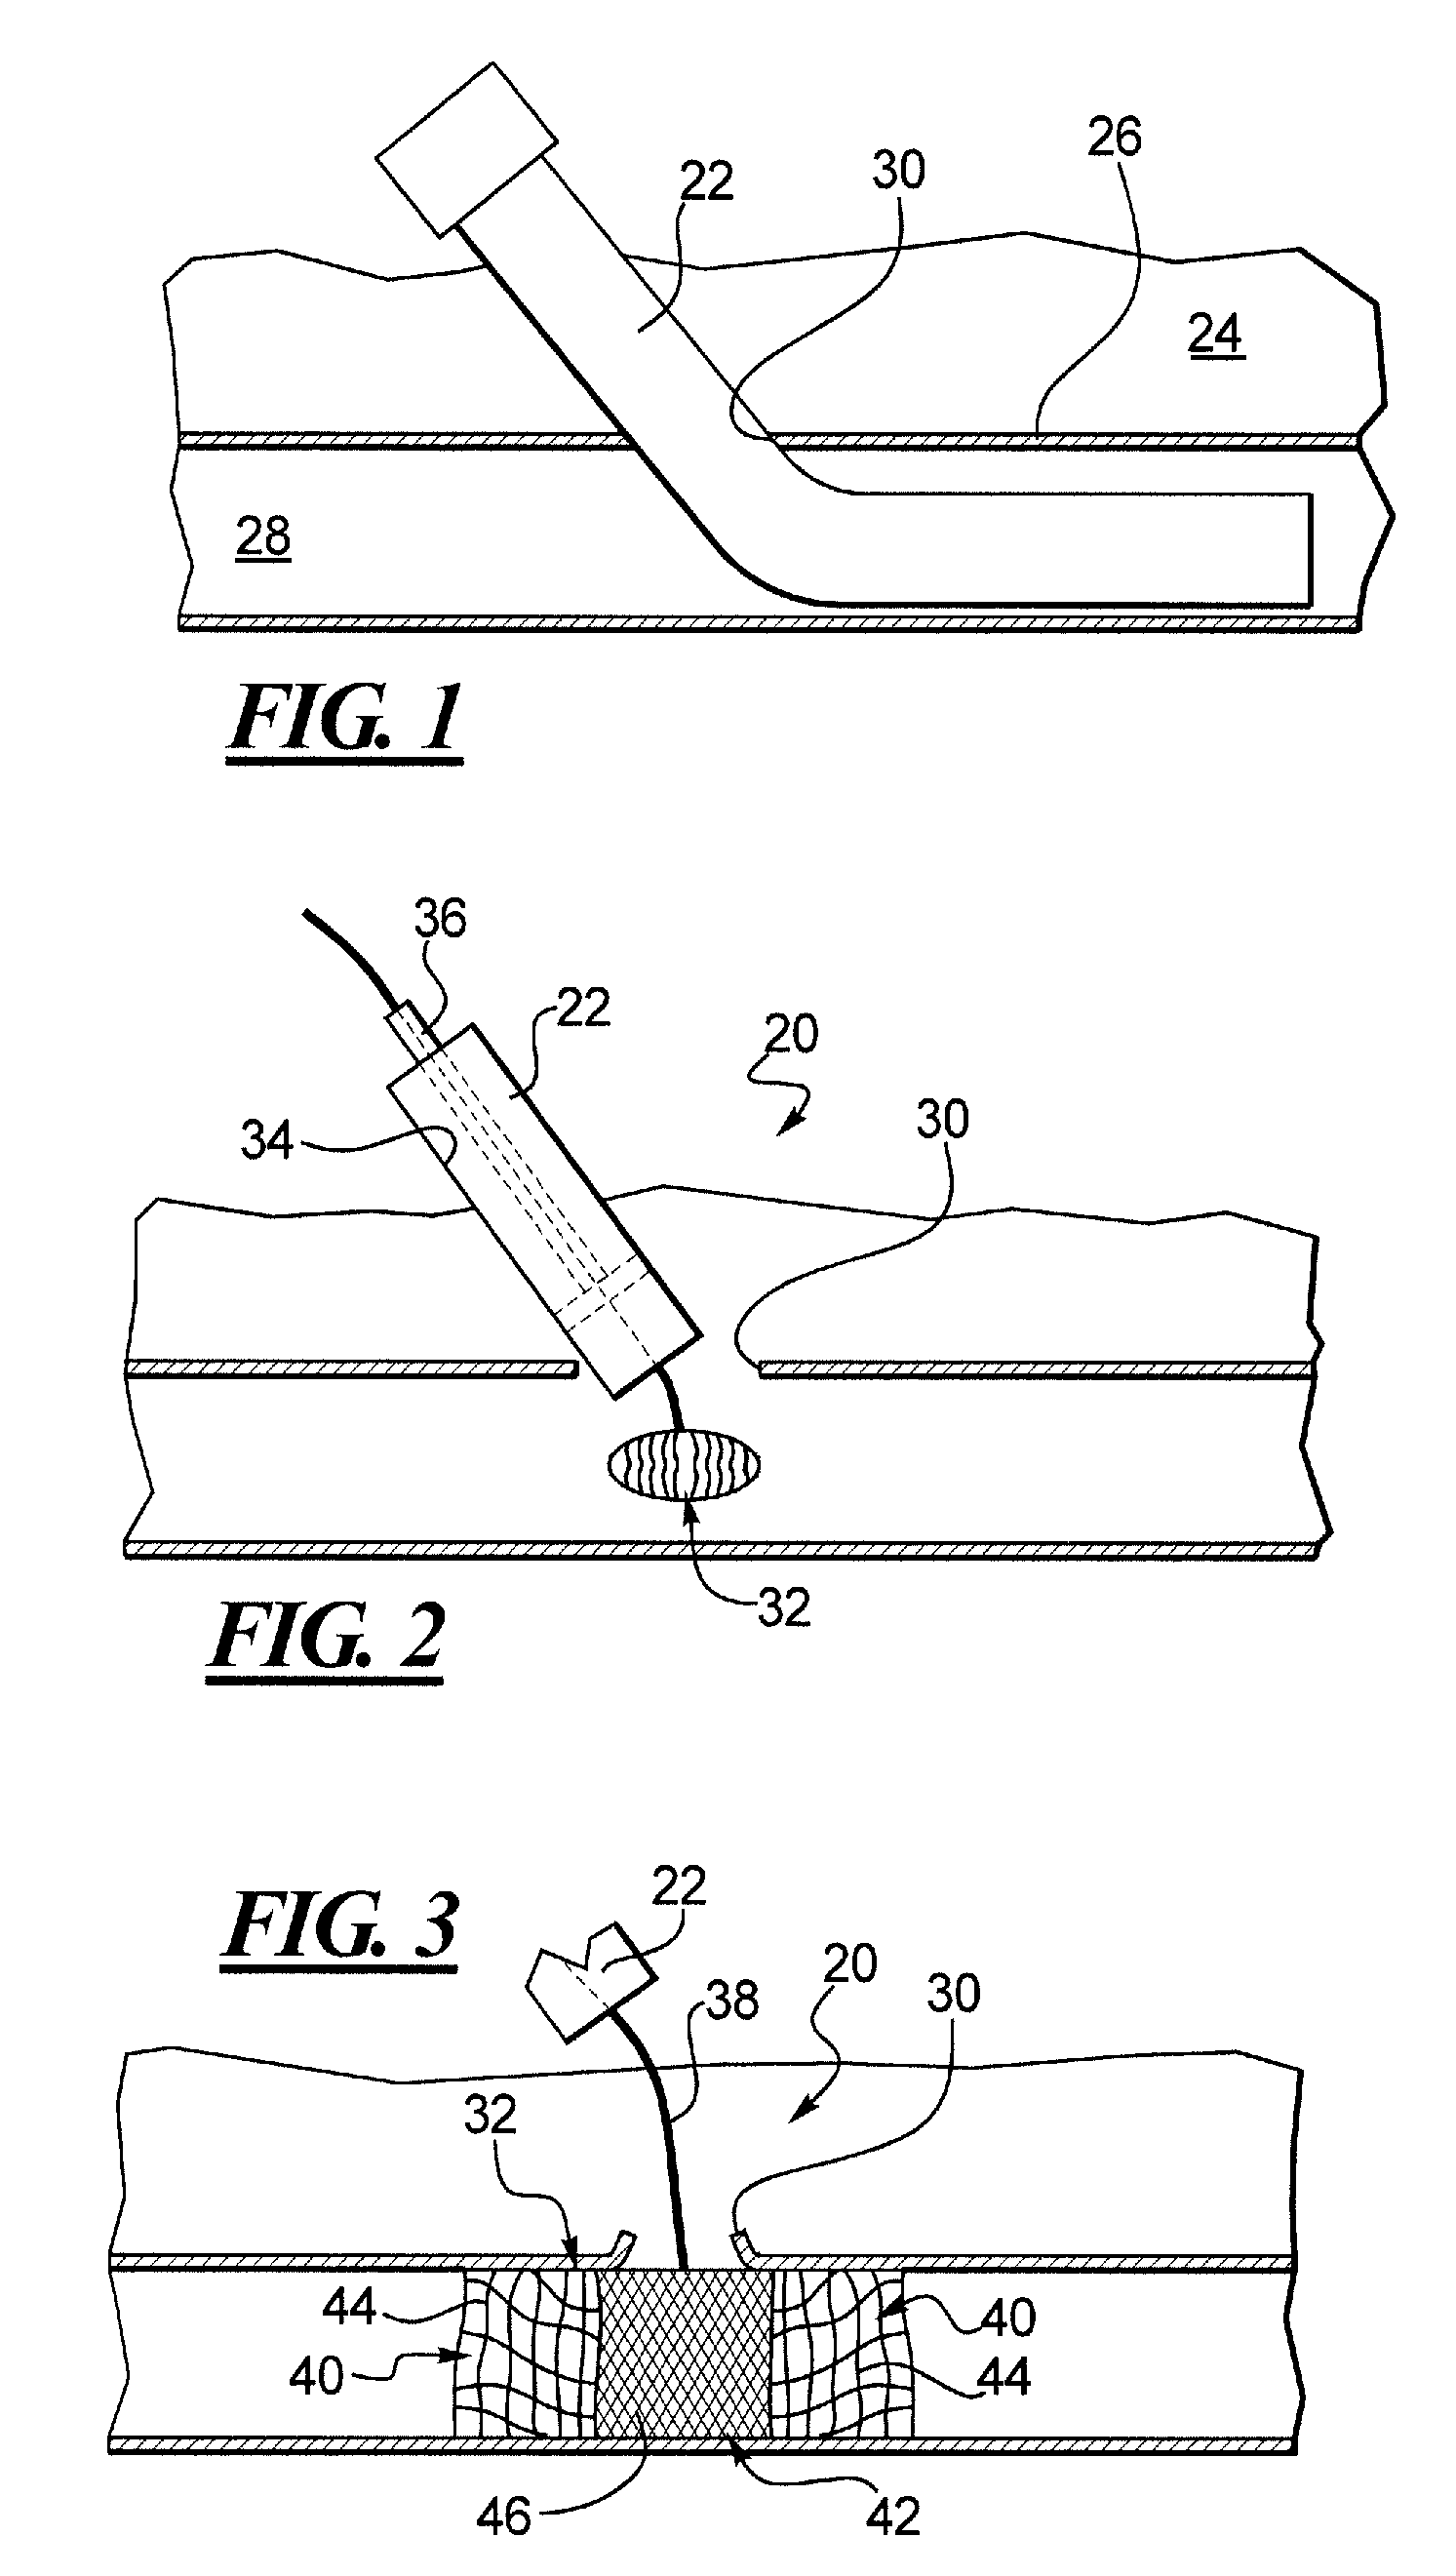 Apparatus and Method for Sealing a Vessel Puncture Opening